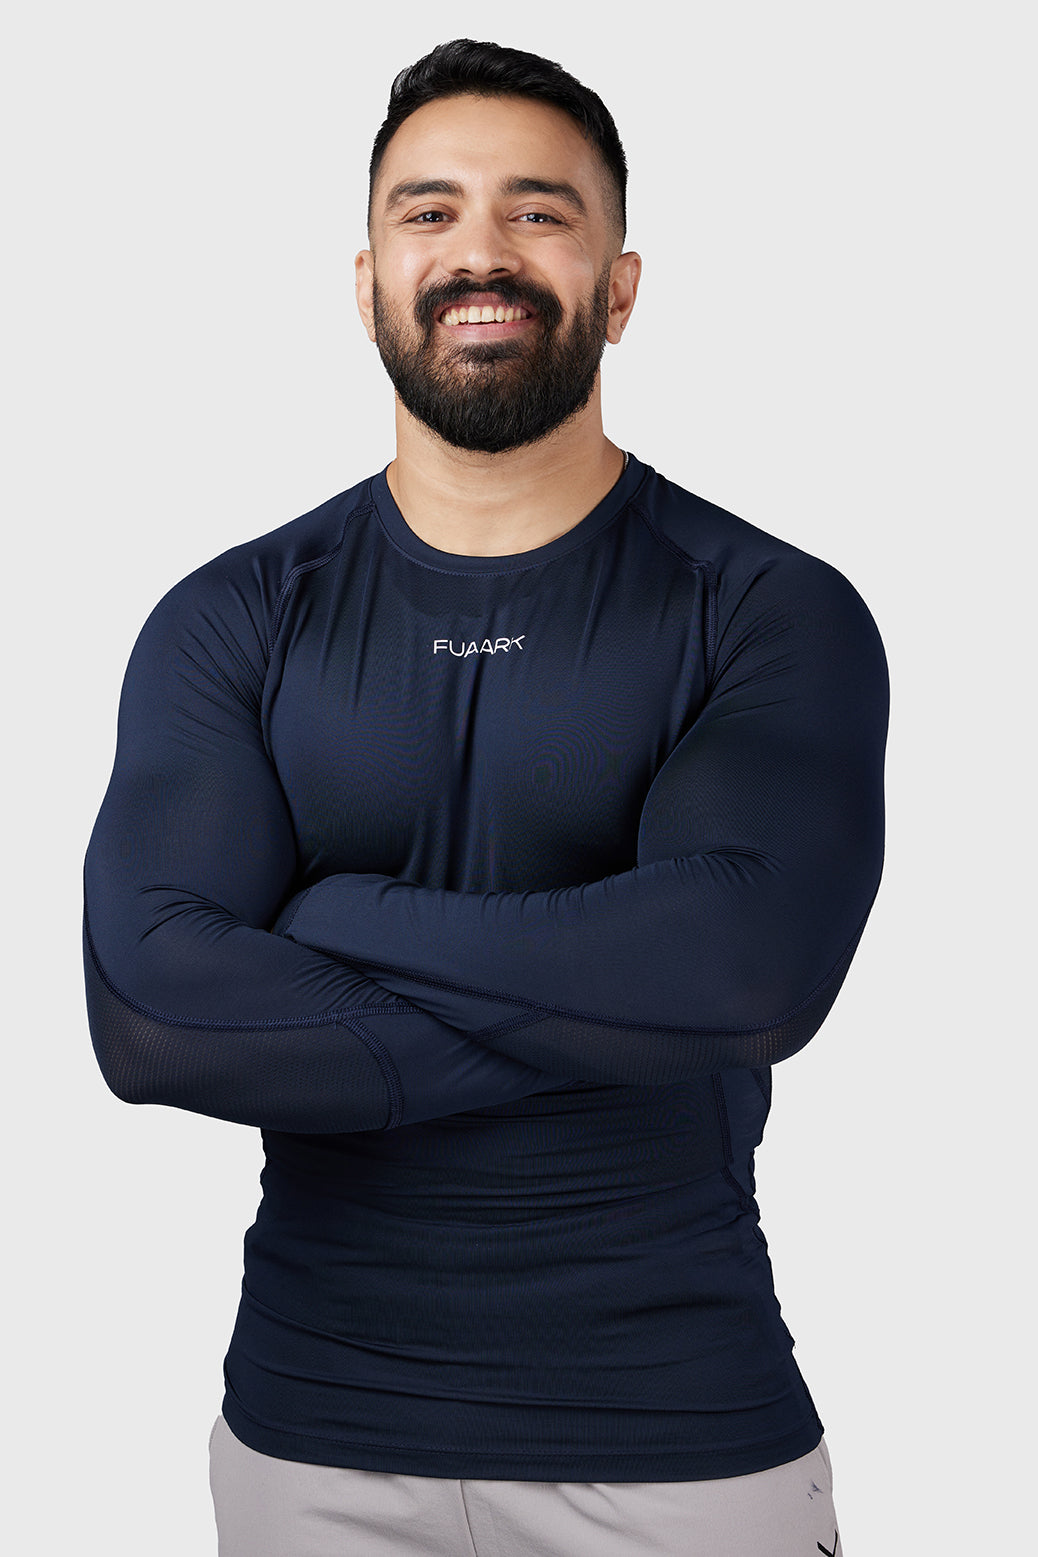 Compression 2.0 Full Sleeves T-shirt Navy